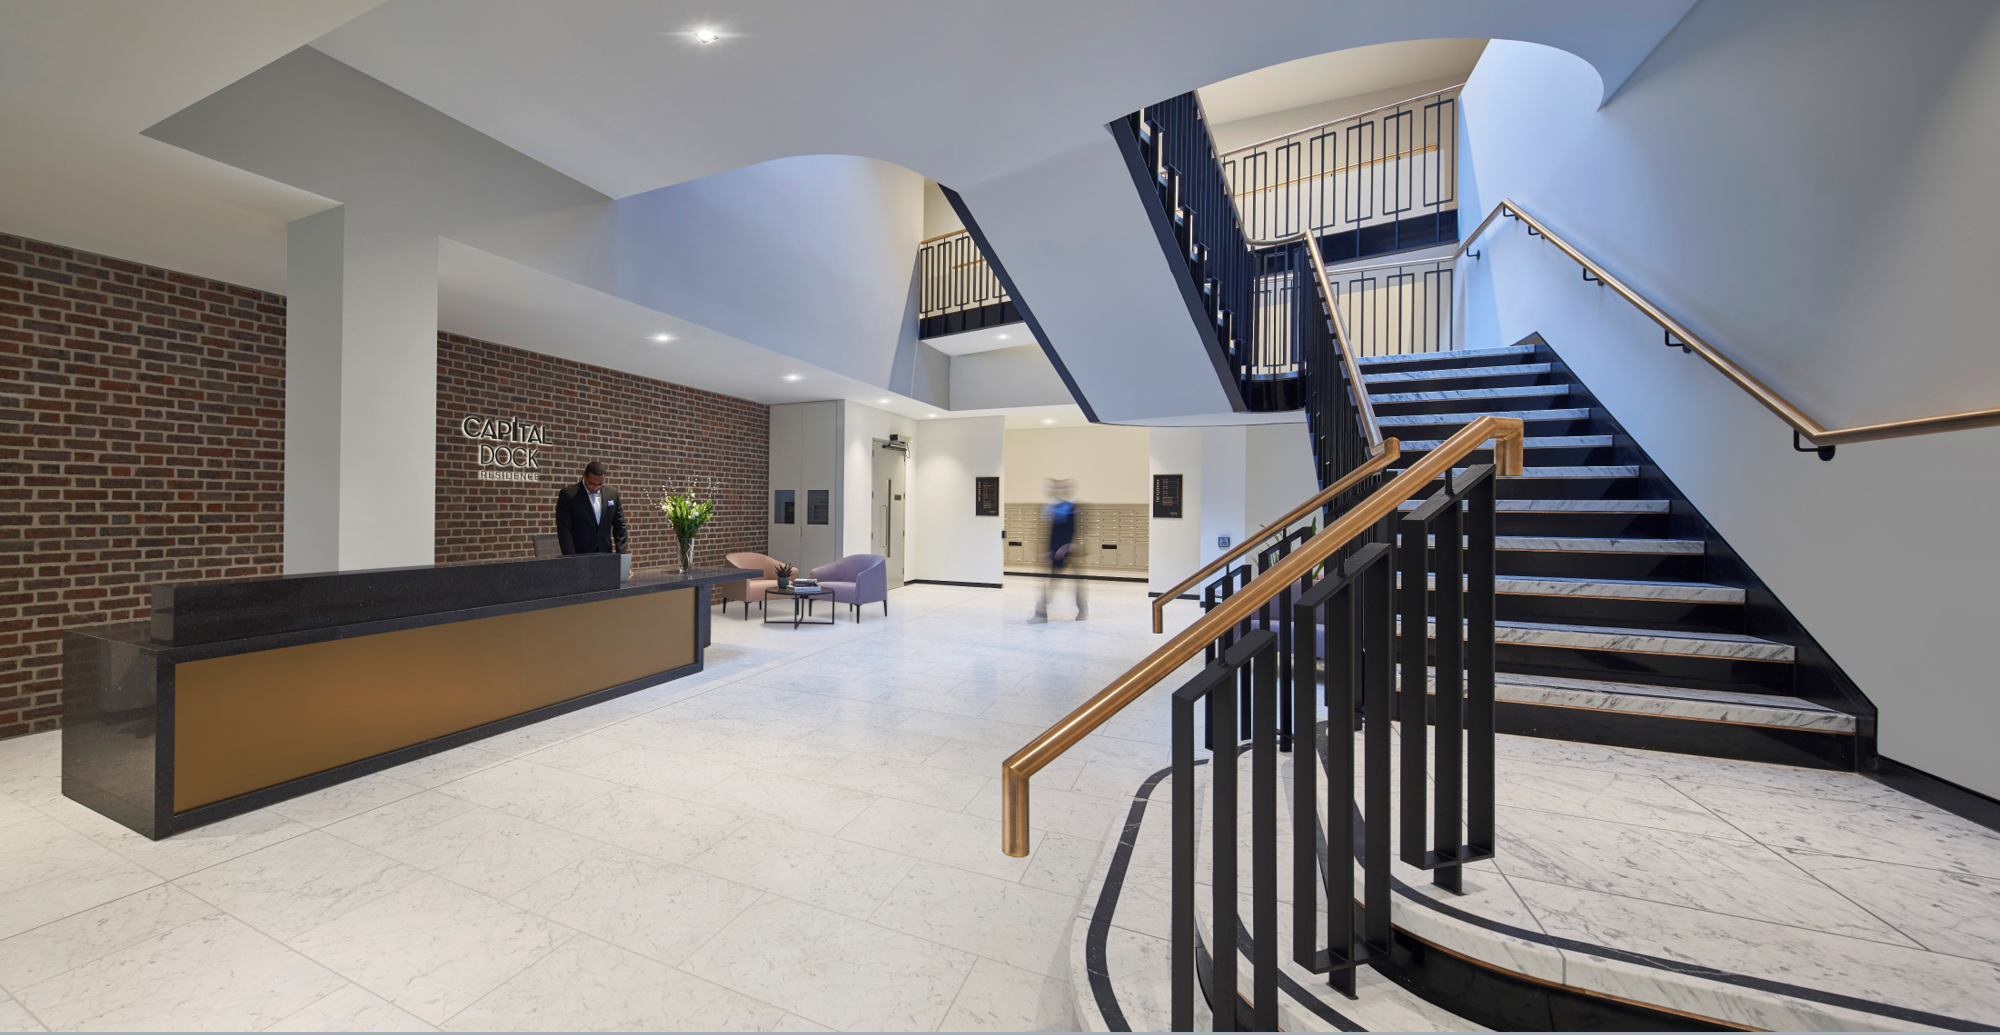 Foyer of apartment building with reception area and stairs